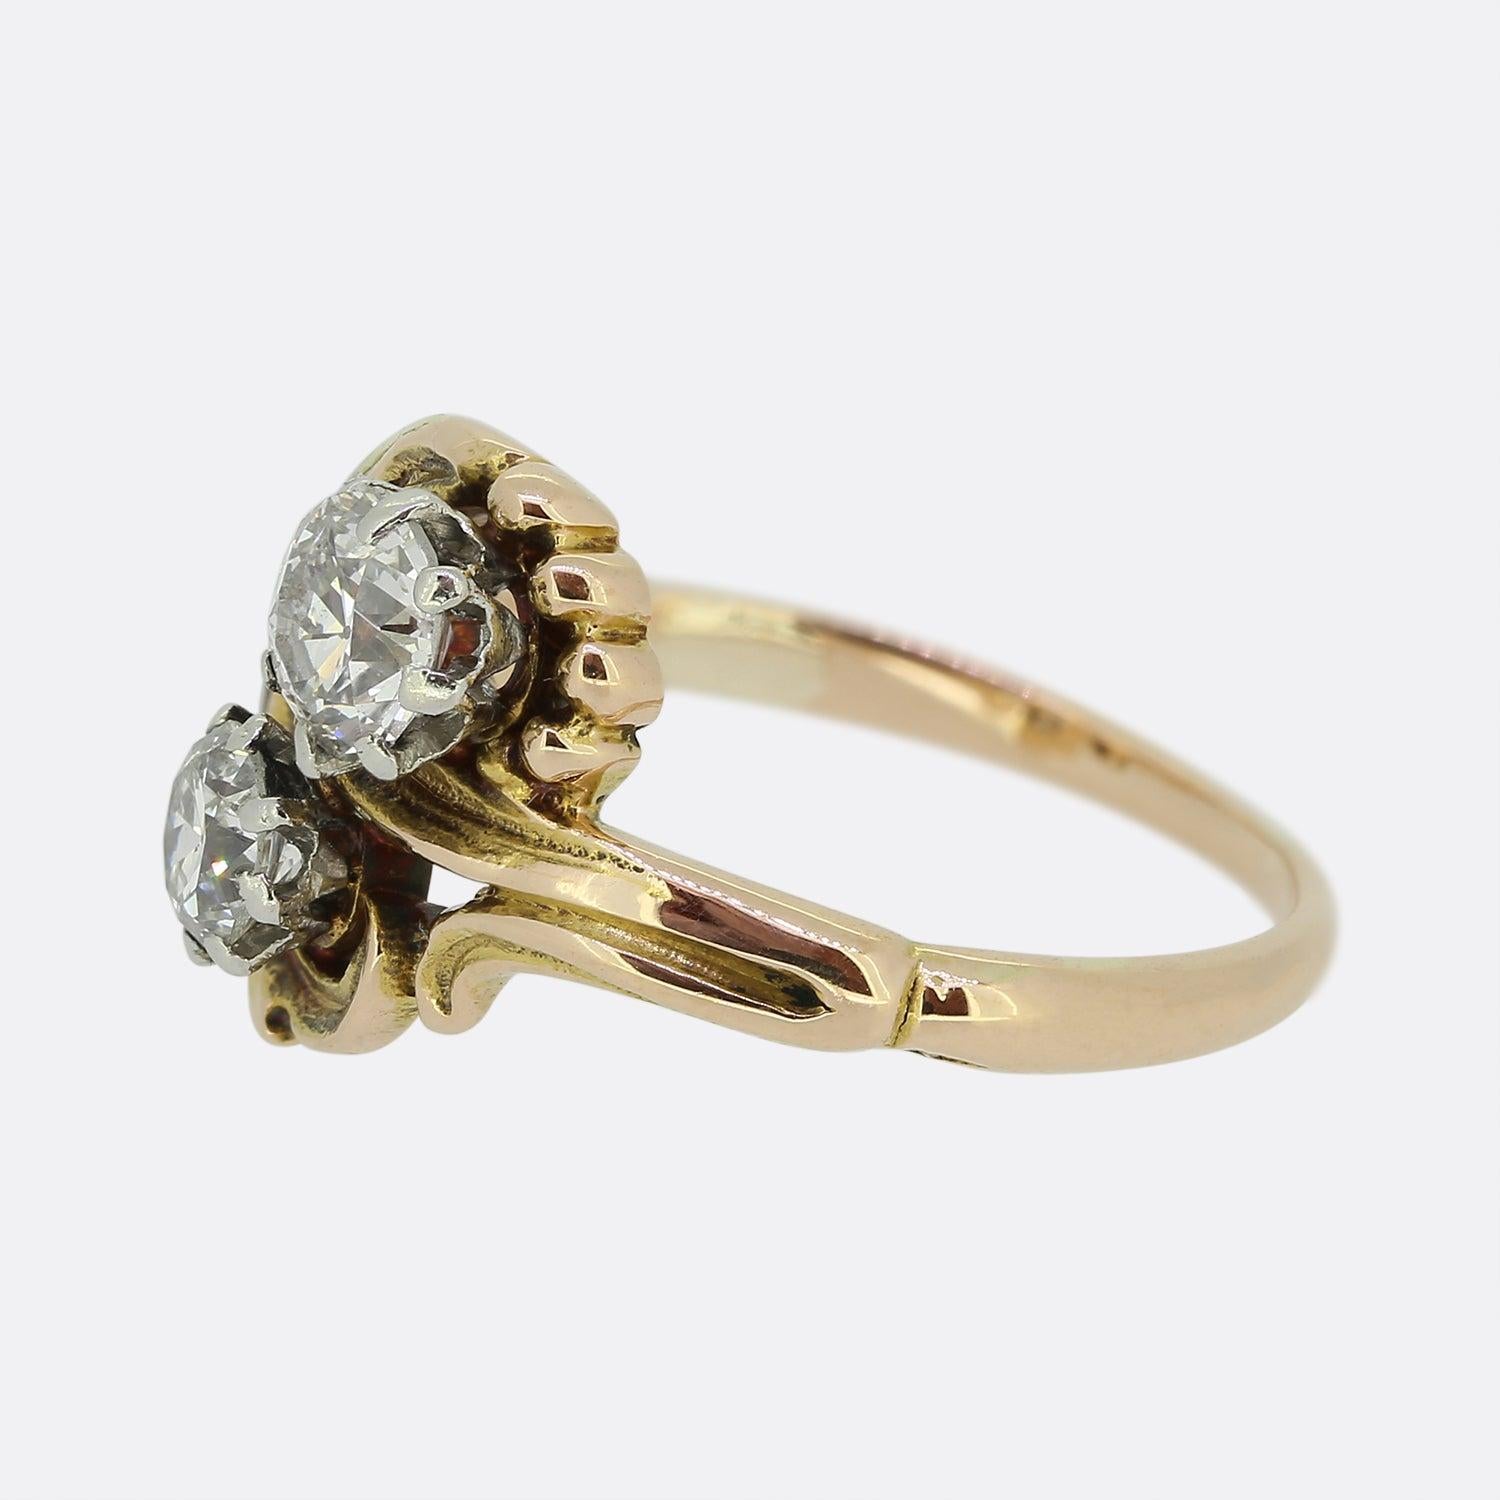 Here we have a delightful 18ct yellow gold ring crafted at a time when the Art Nouveau style was at the height of design. A duo of old European cut diamonds sit individually claw set in a diagonal formation atop a rich swirling backdrop; the